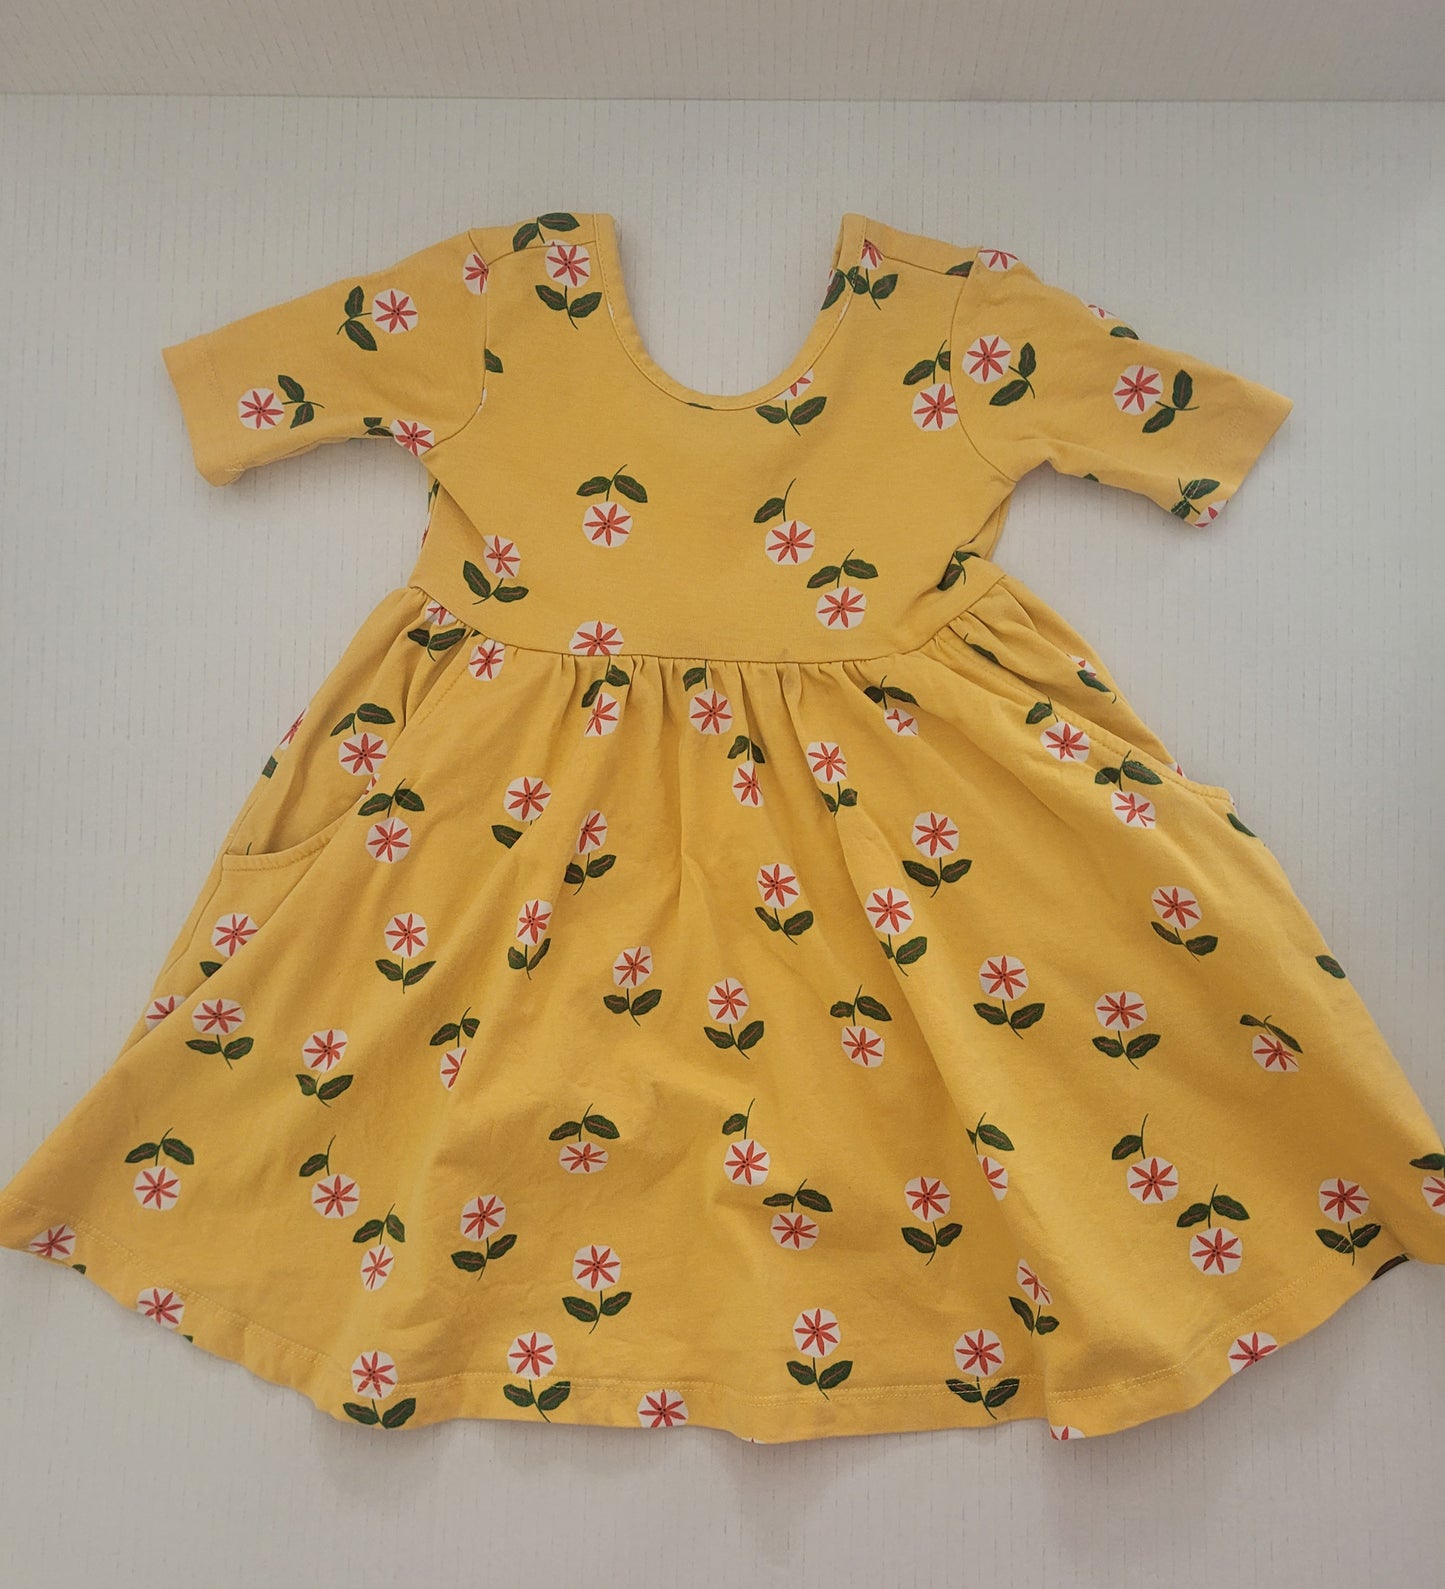 Hanna Andersson Girls Yellow Flower Dress Size 90/3T